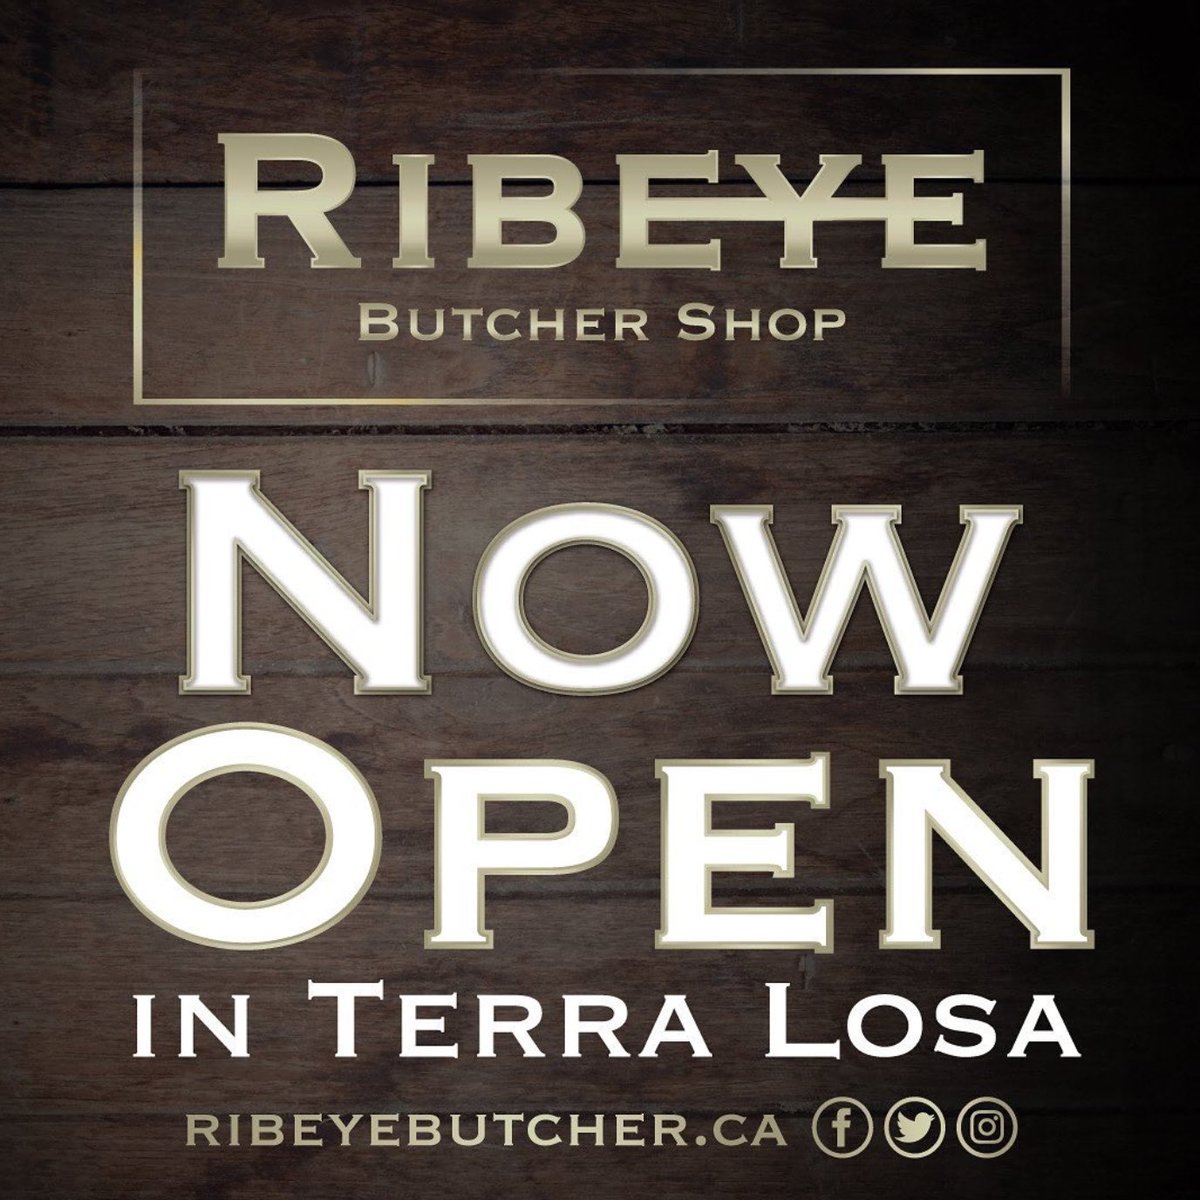 Now open at Terra Losa! Fresh meat, local products, prepared foods, smashed burgers made to order and more. 📍9512 170 ST NW
.
.
#westedmonton #yeg #edmonton #yegbutcher #yegfoodies #yegfood #yegbusiness #yeglocal #yeghiring